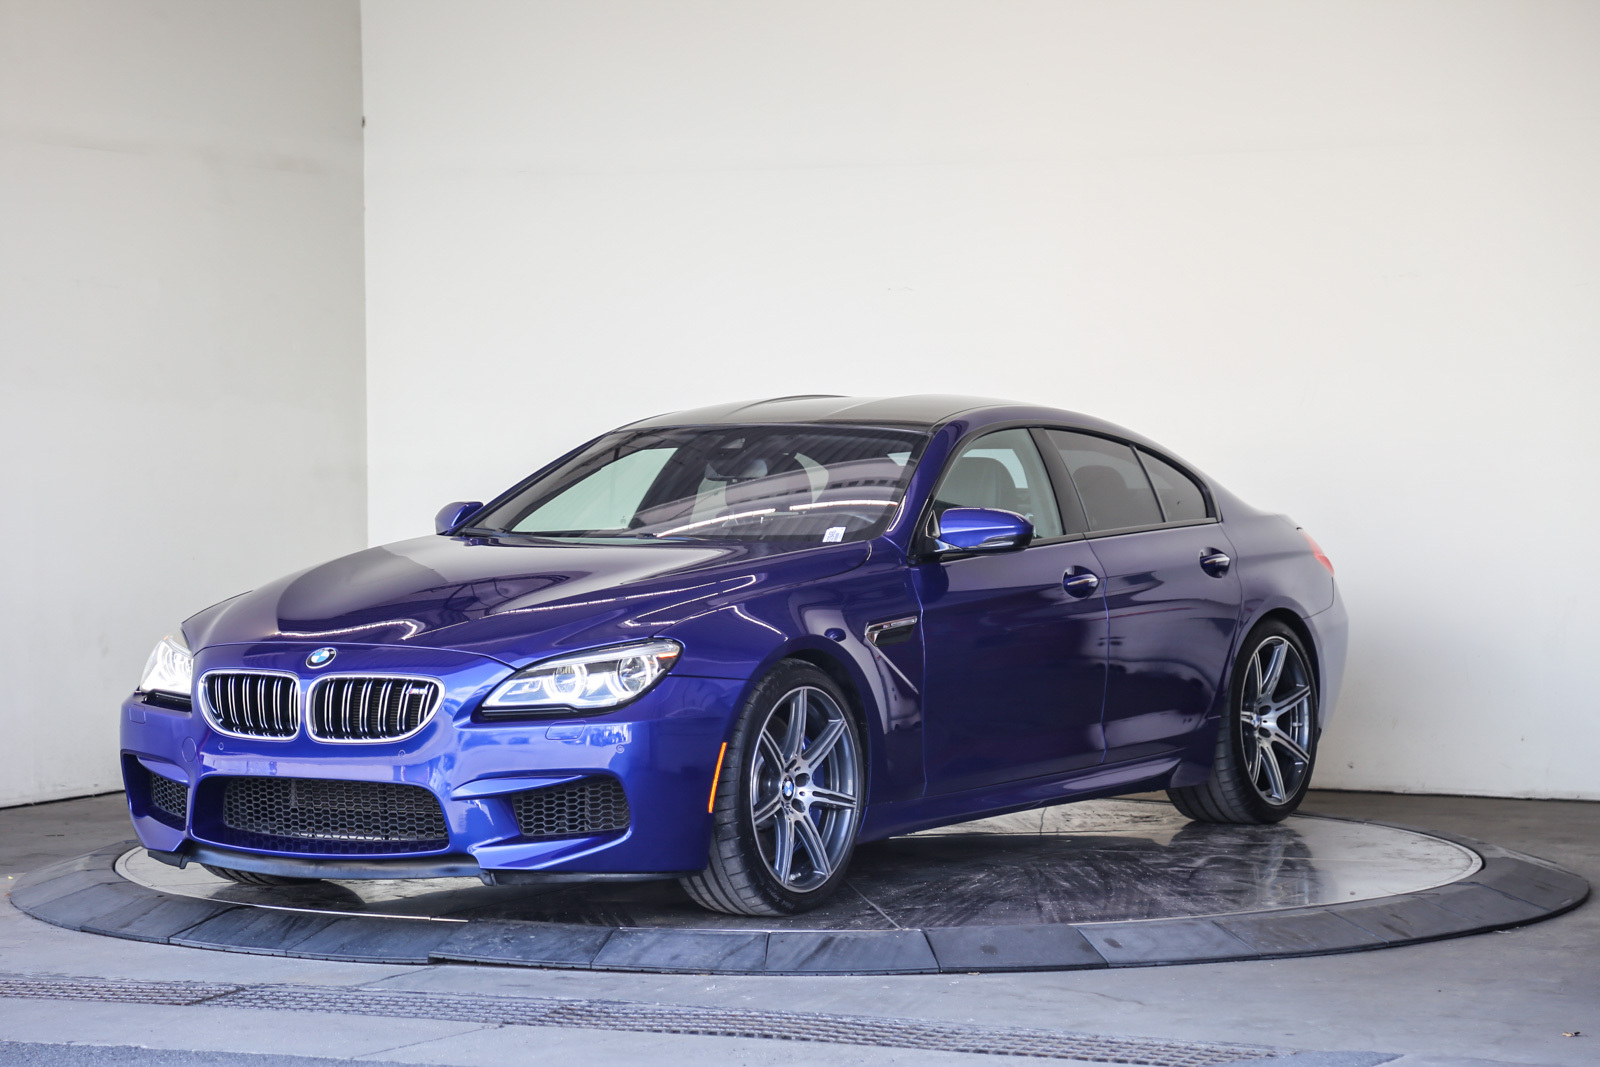 Pre-Owned 2019 BMW M6 Gran Coupe 4dr Car in Glendale #602949L | Pacific BMW